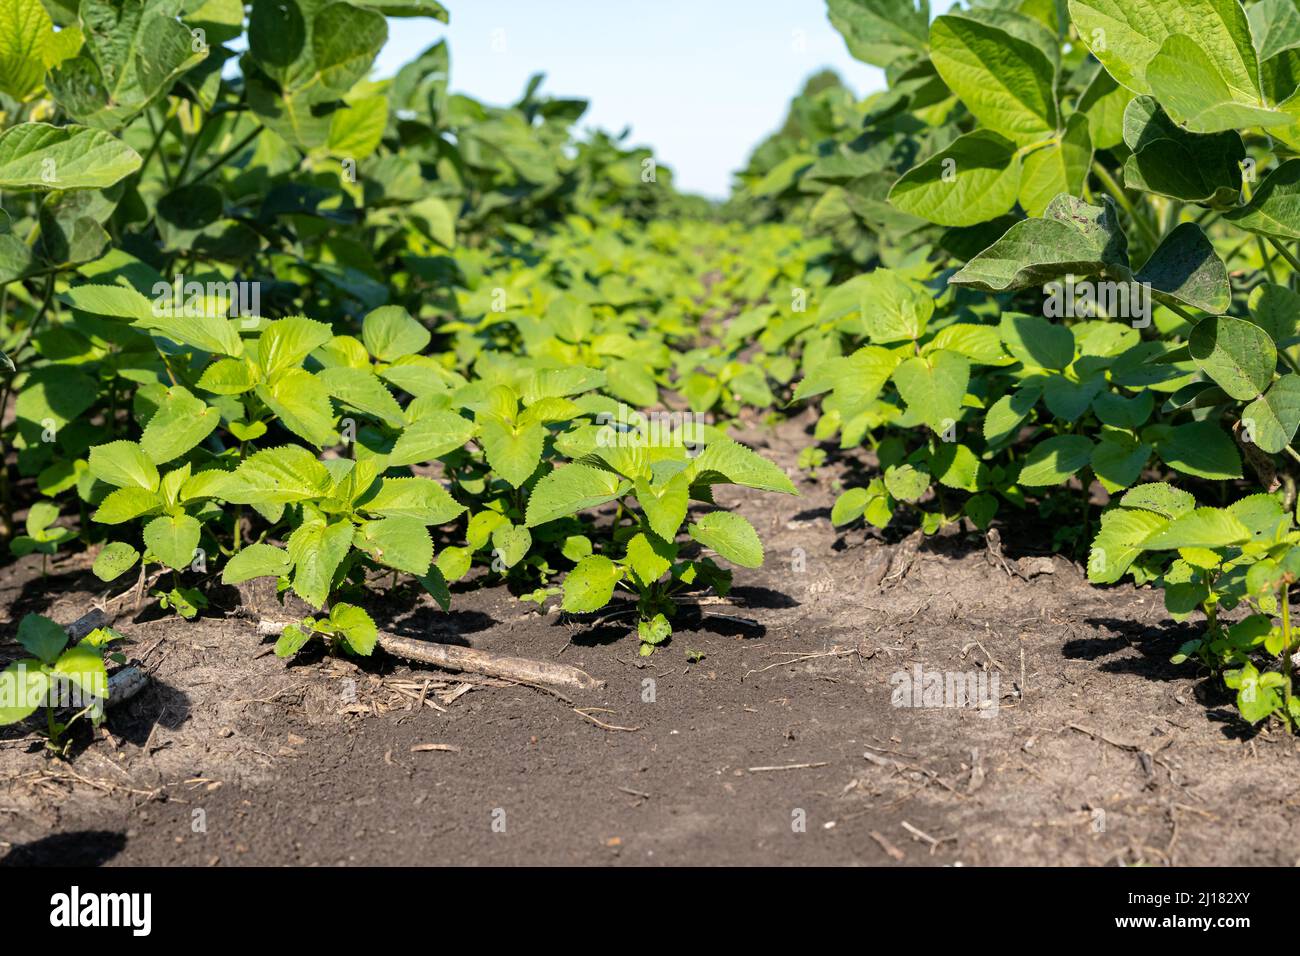 Prickly Sida, Teaweed, growing in soybean field. Weed control, herbicide application, and agriculture concept. Stock Photo